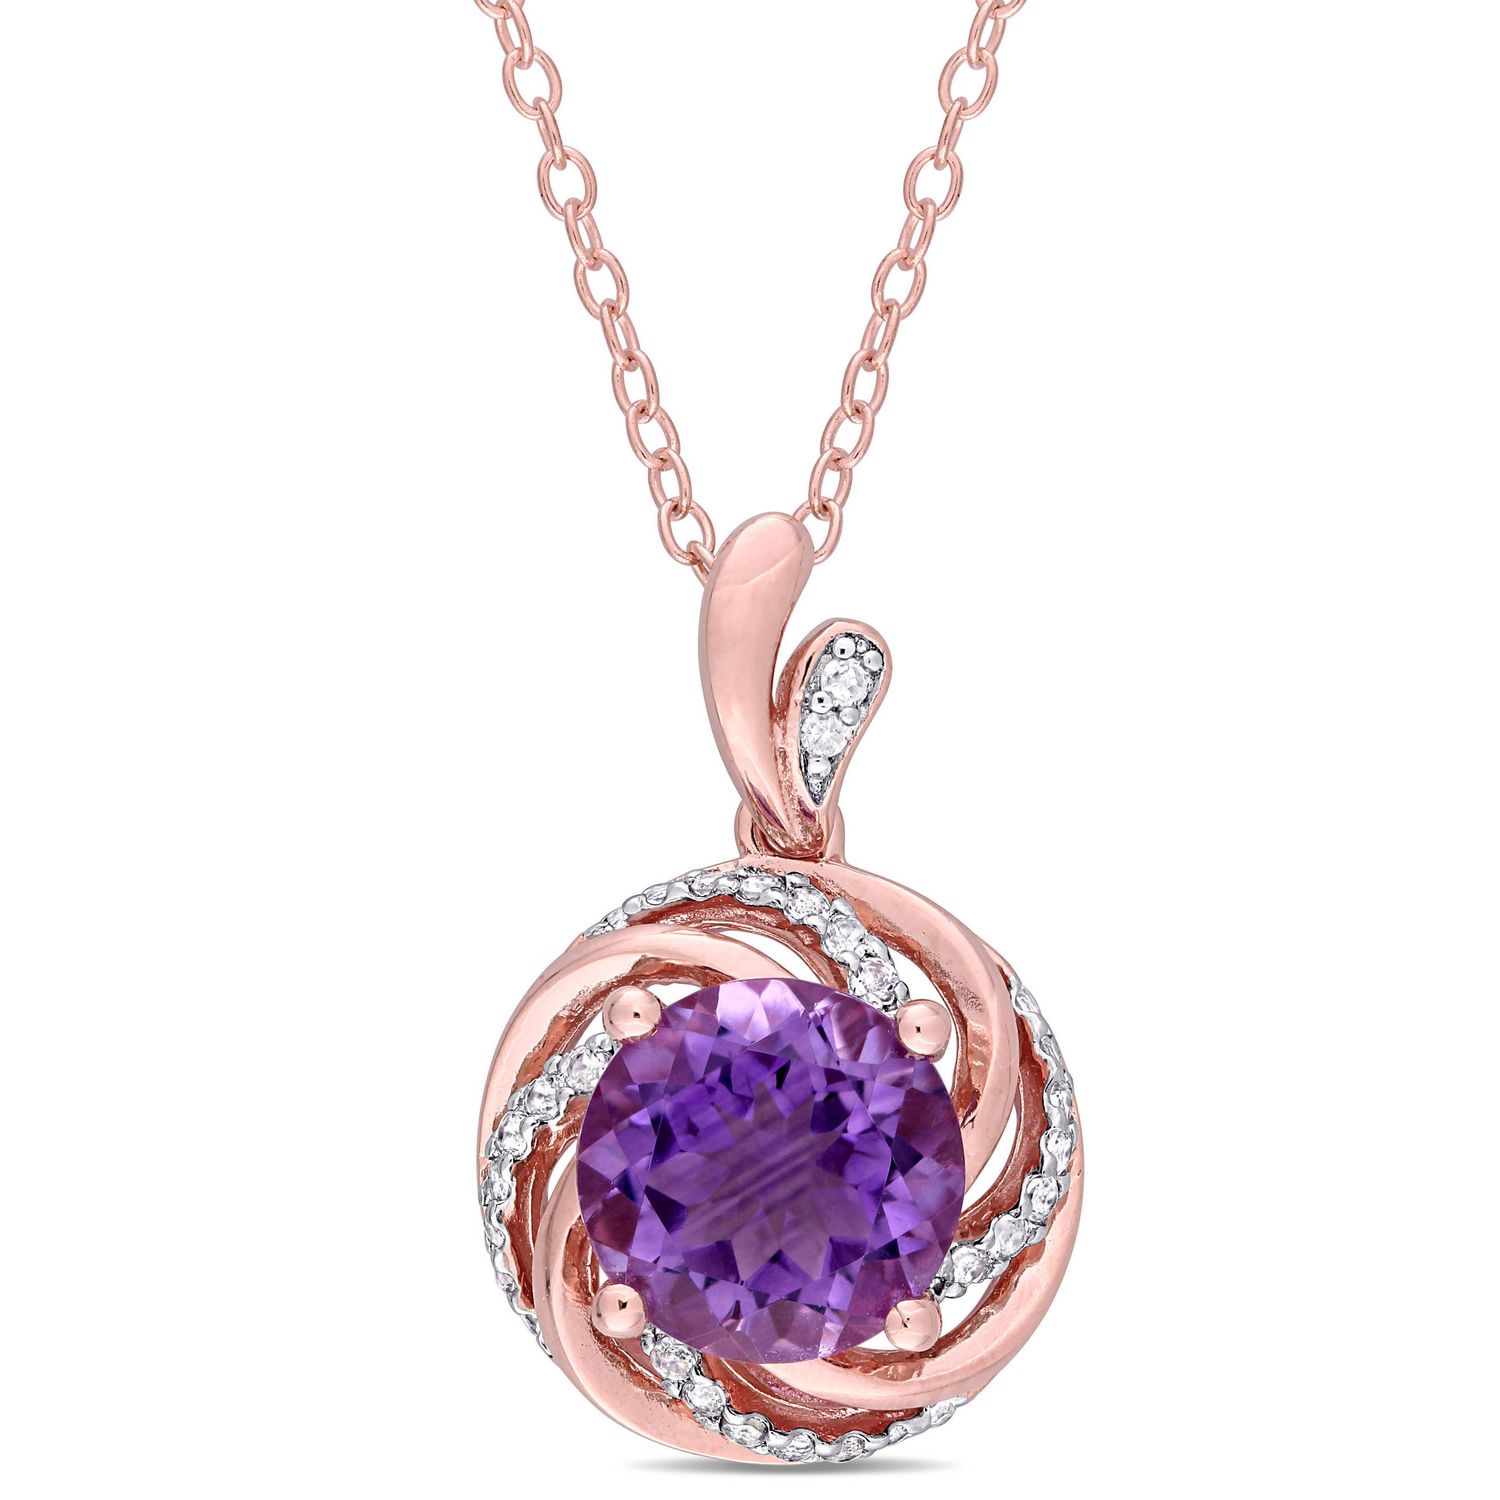 Tangelo 1-5/8 Carat T.G.W. Amethyst and White Topaz Diamond-Accent Rose ...